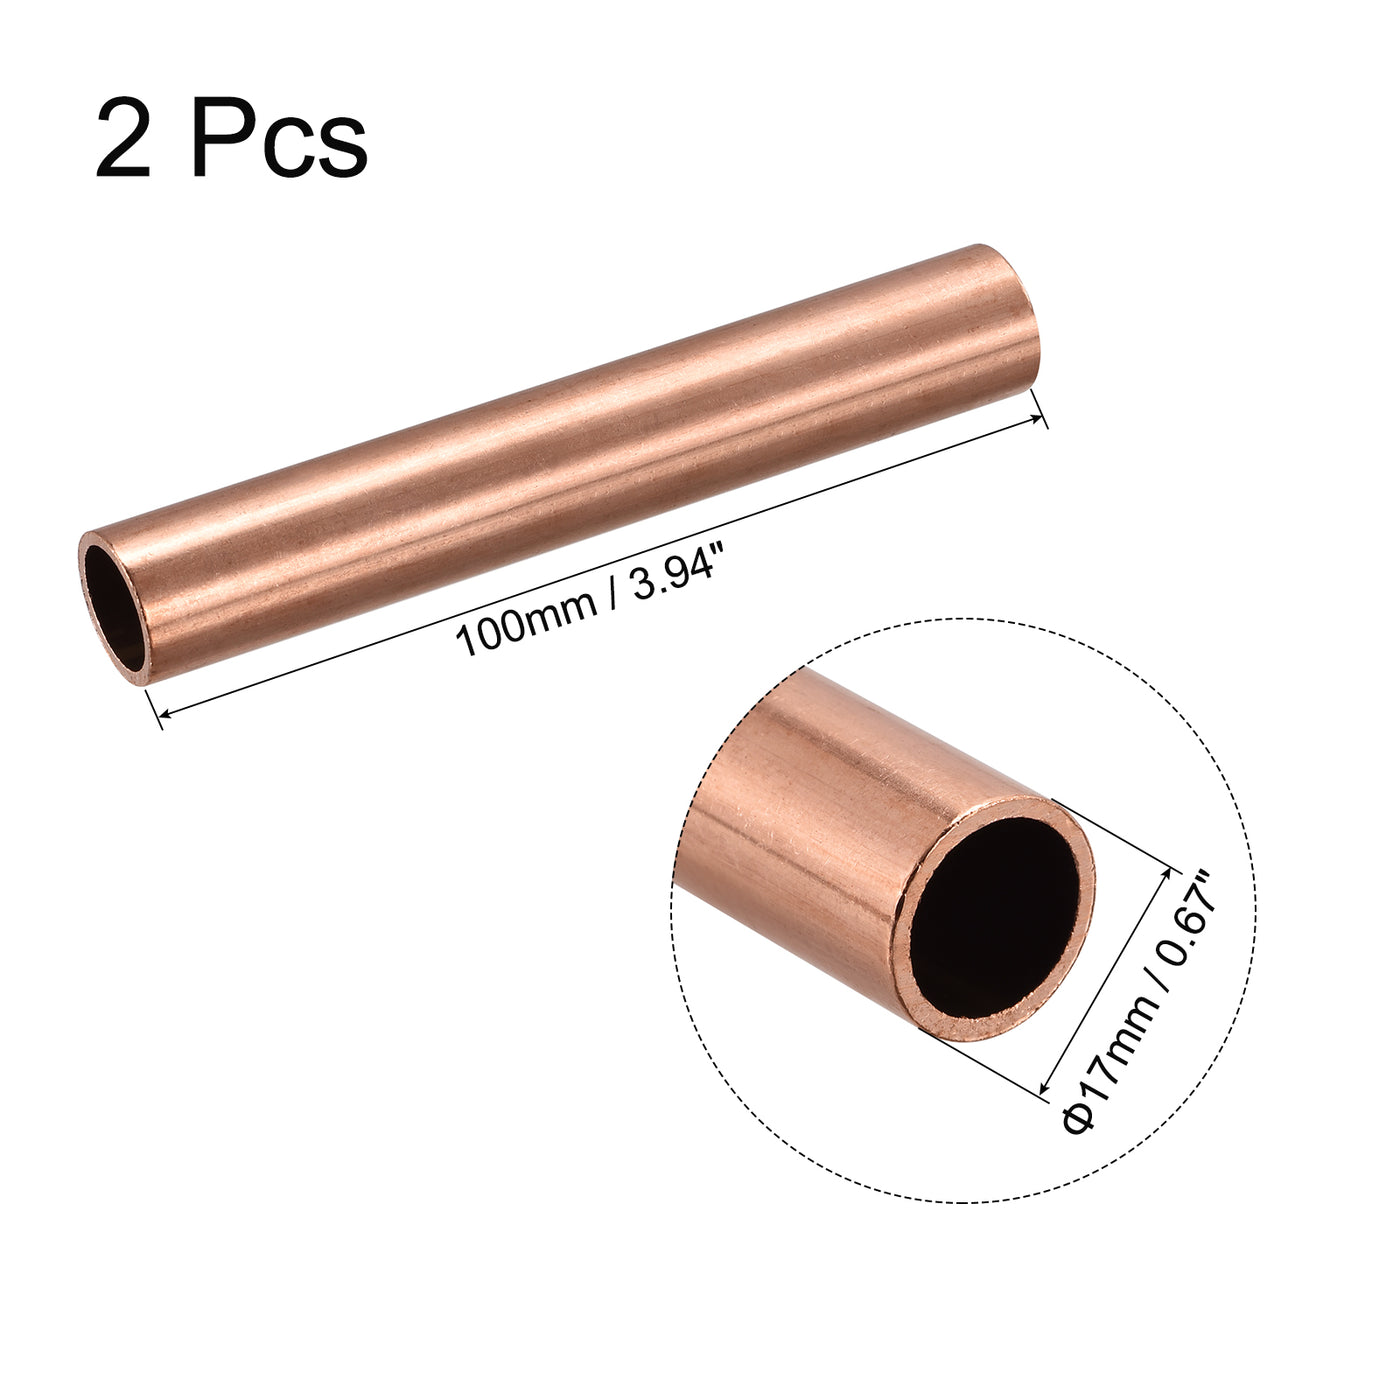 uxcell Uxcell Copper Round Tube 17mm OD 1.5mm Wall Thickness 100mm Length Pipe Tubing 2 Pcs